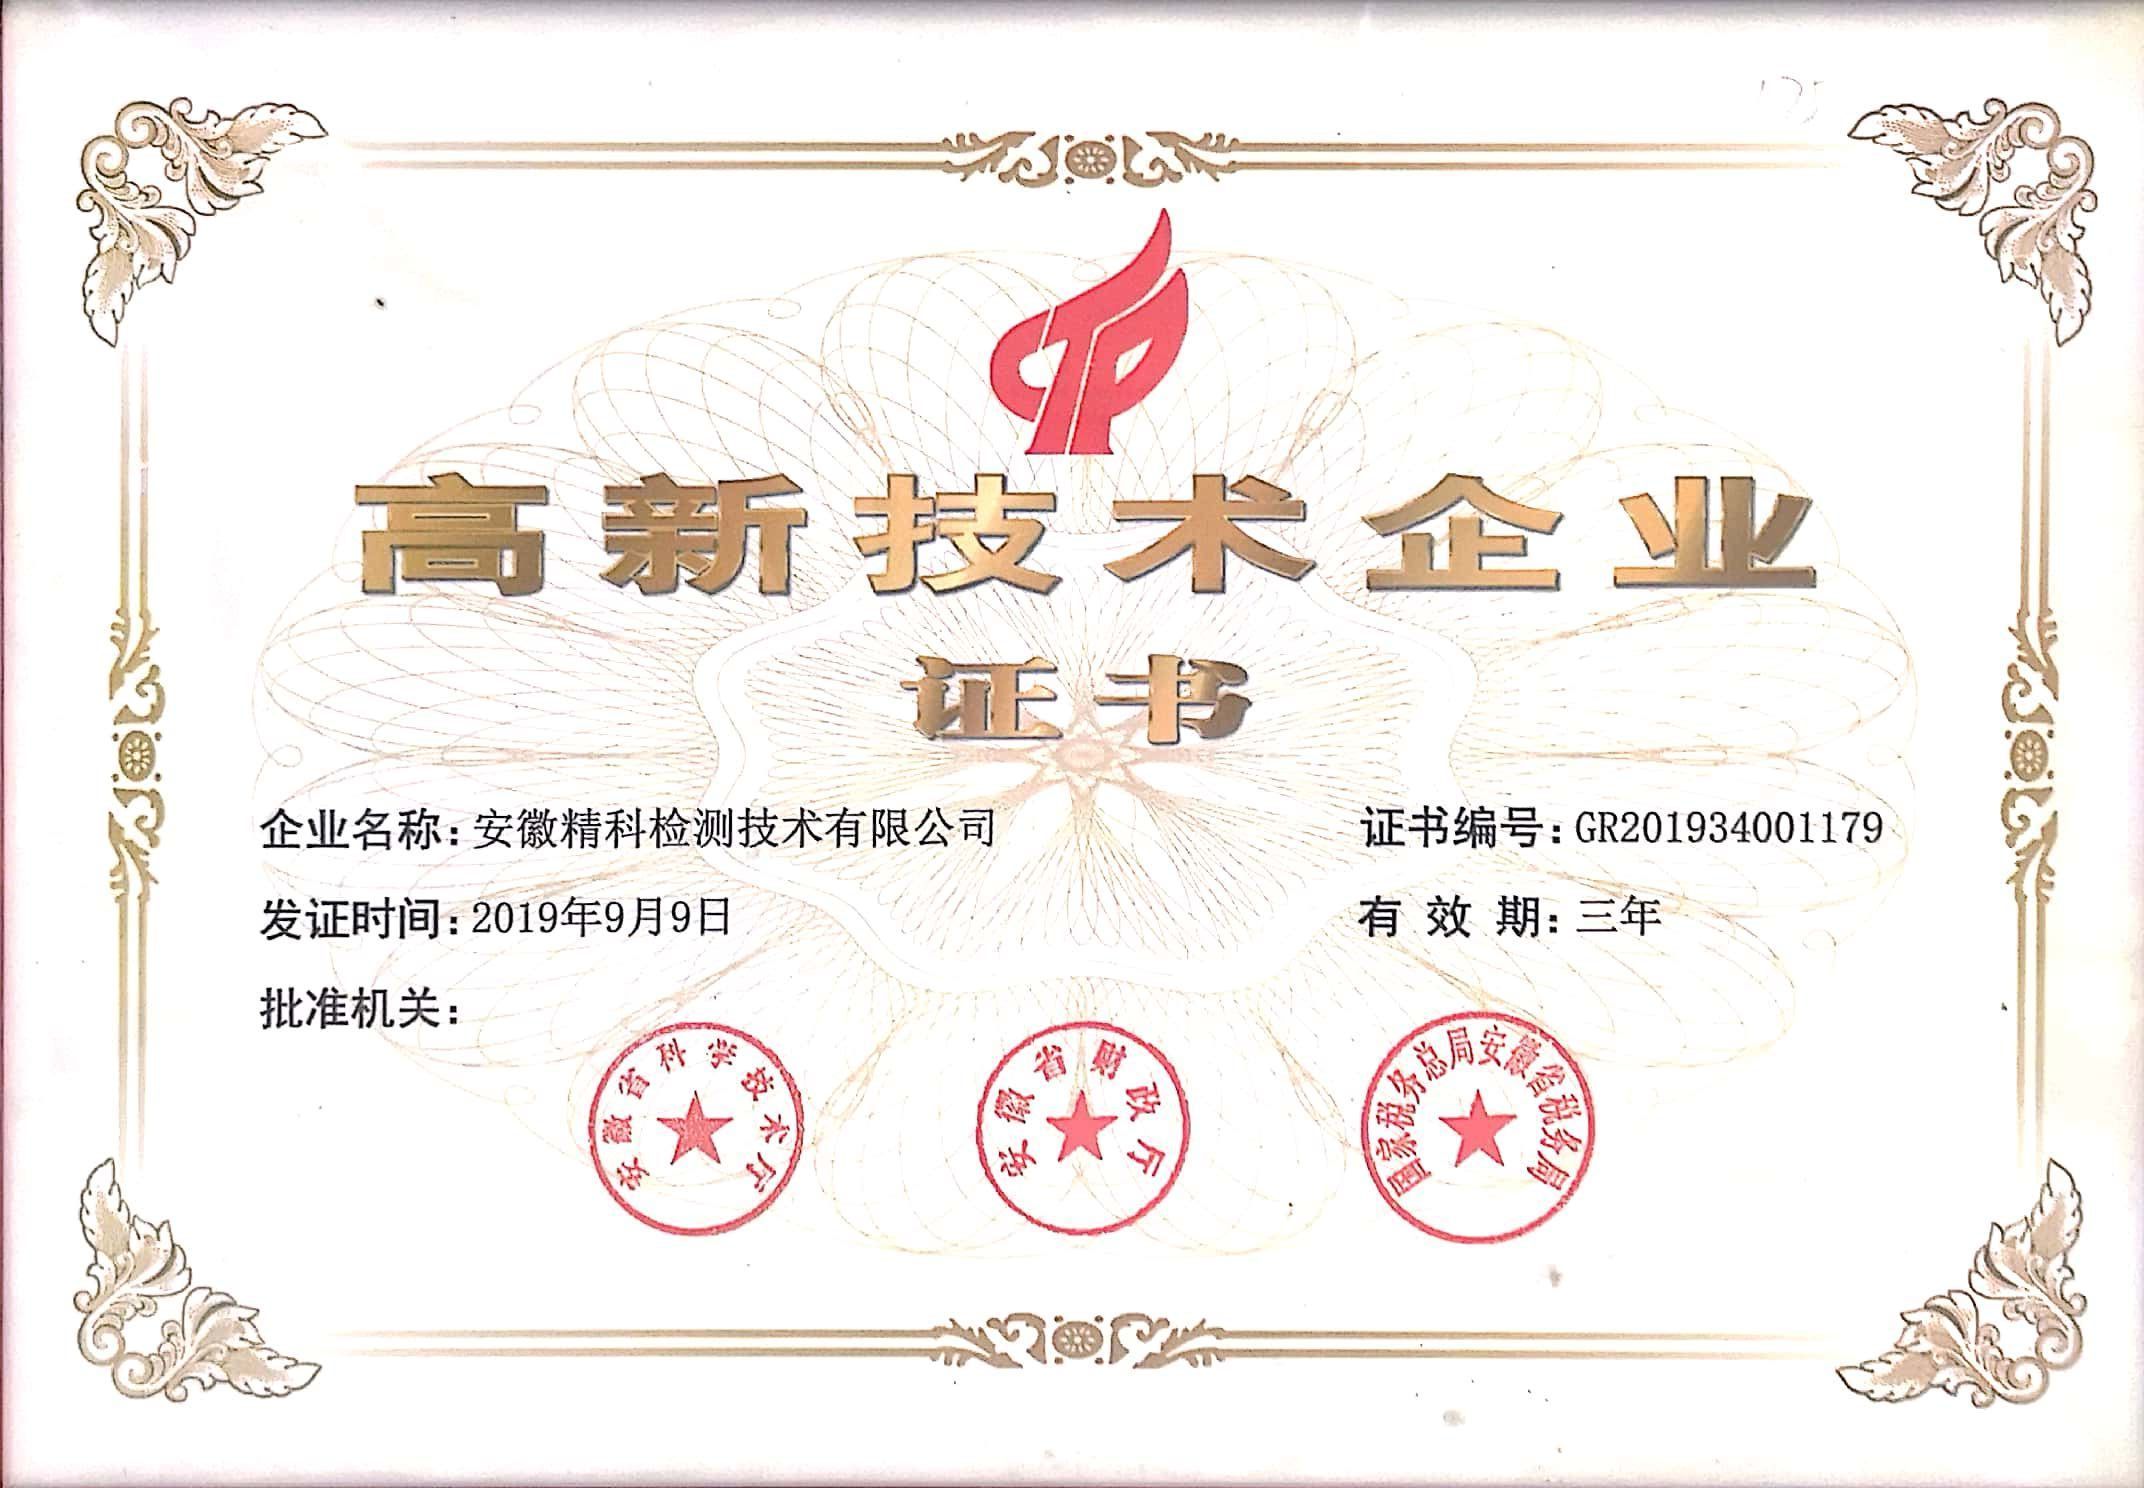 Our company successfully passed the second national high-tech enterprise certification.